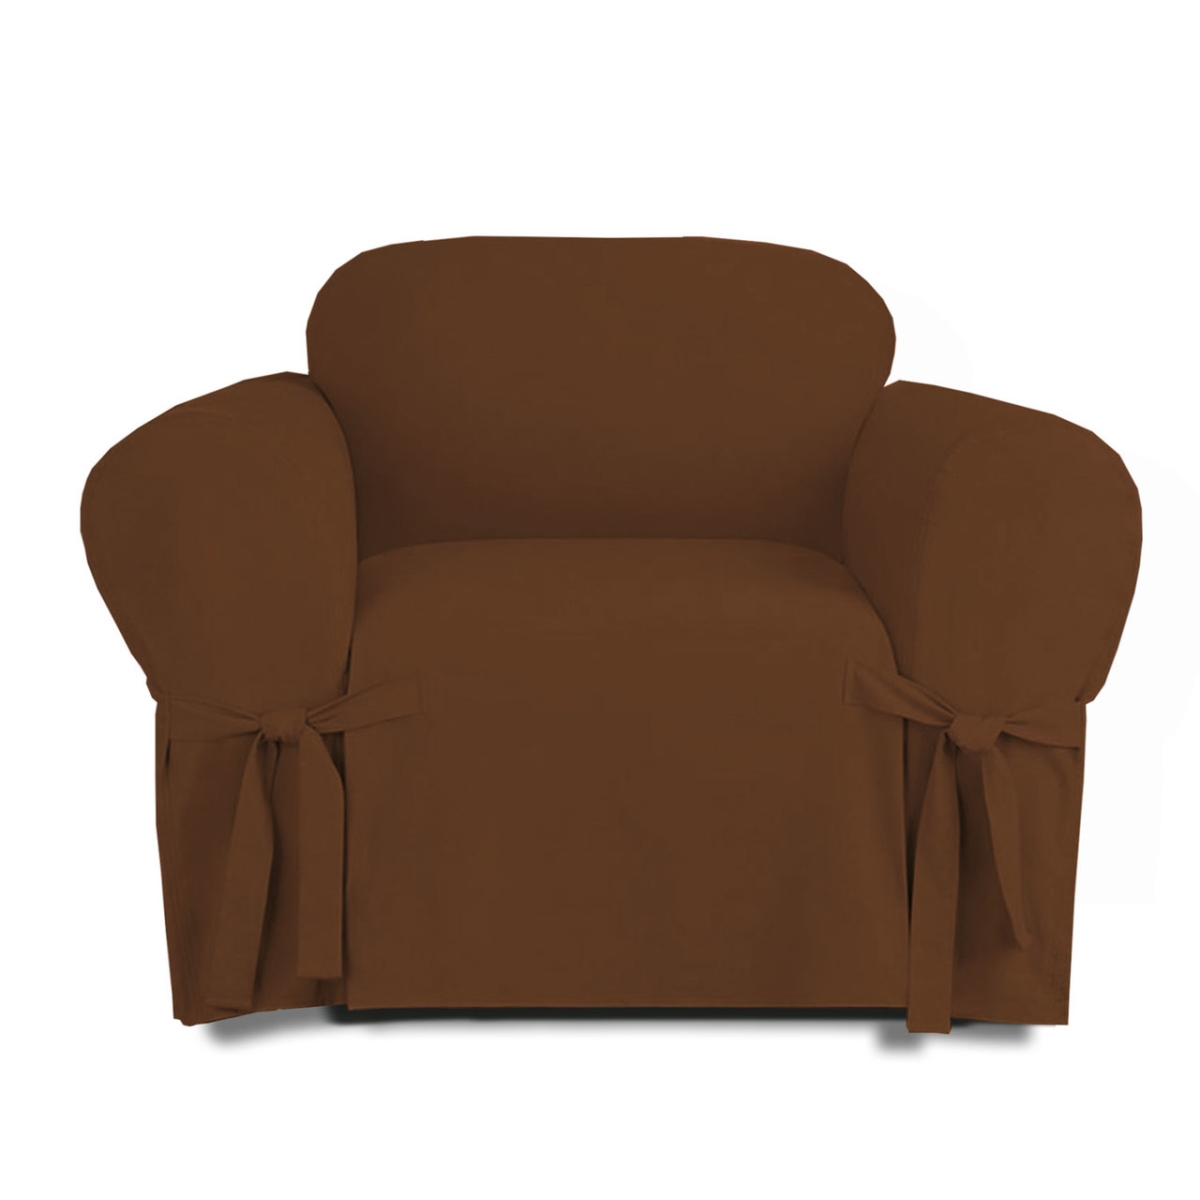 Sc406707 Microsuede Slip Furniture Protector For Chair, Brown